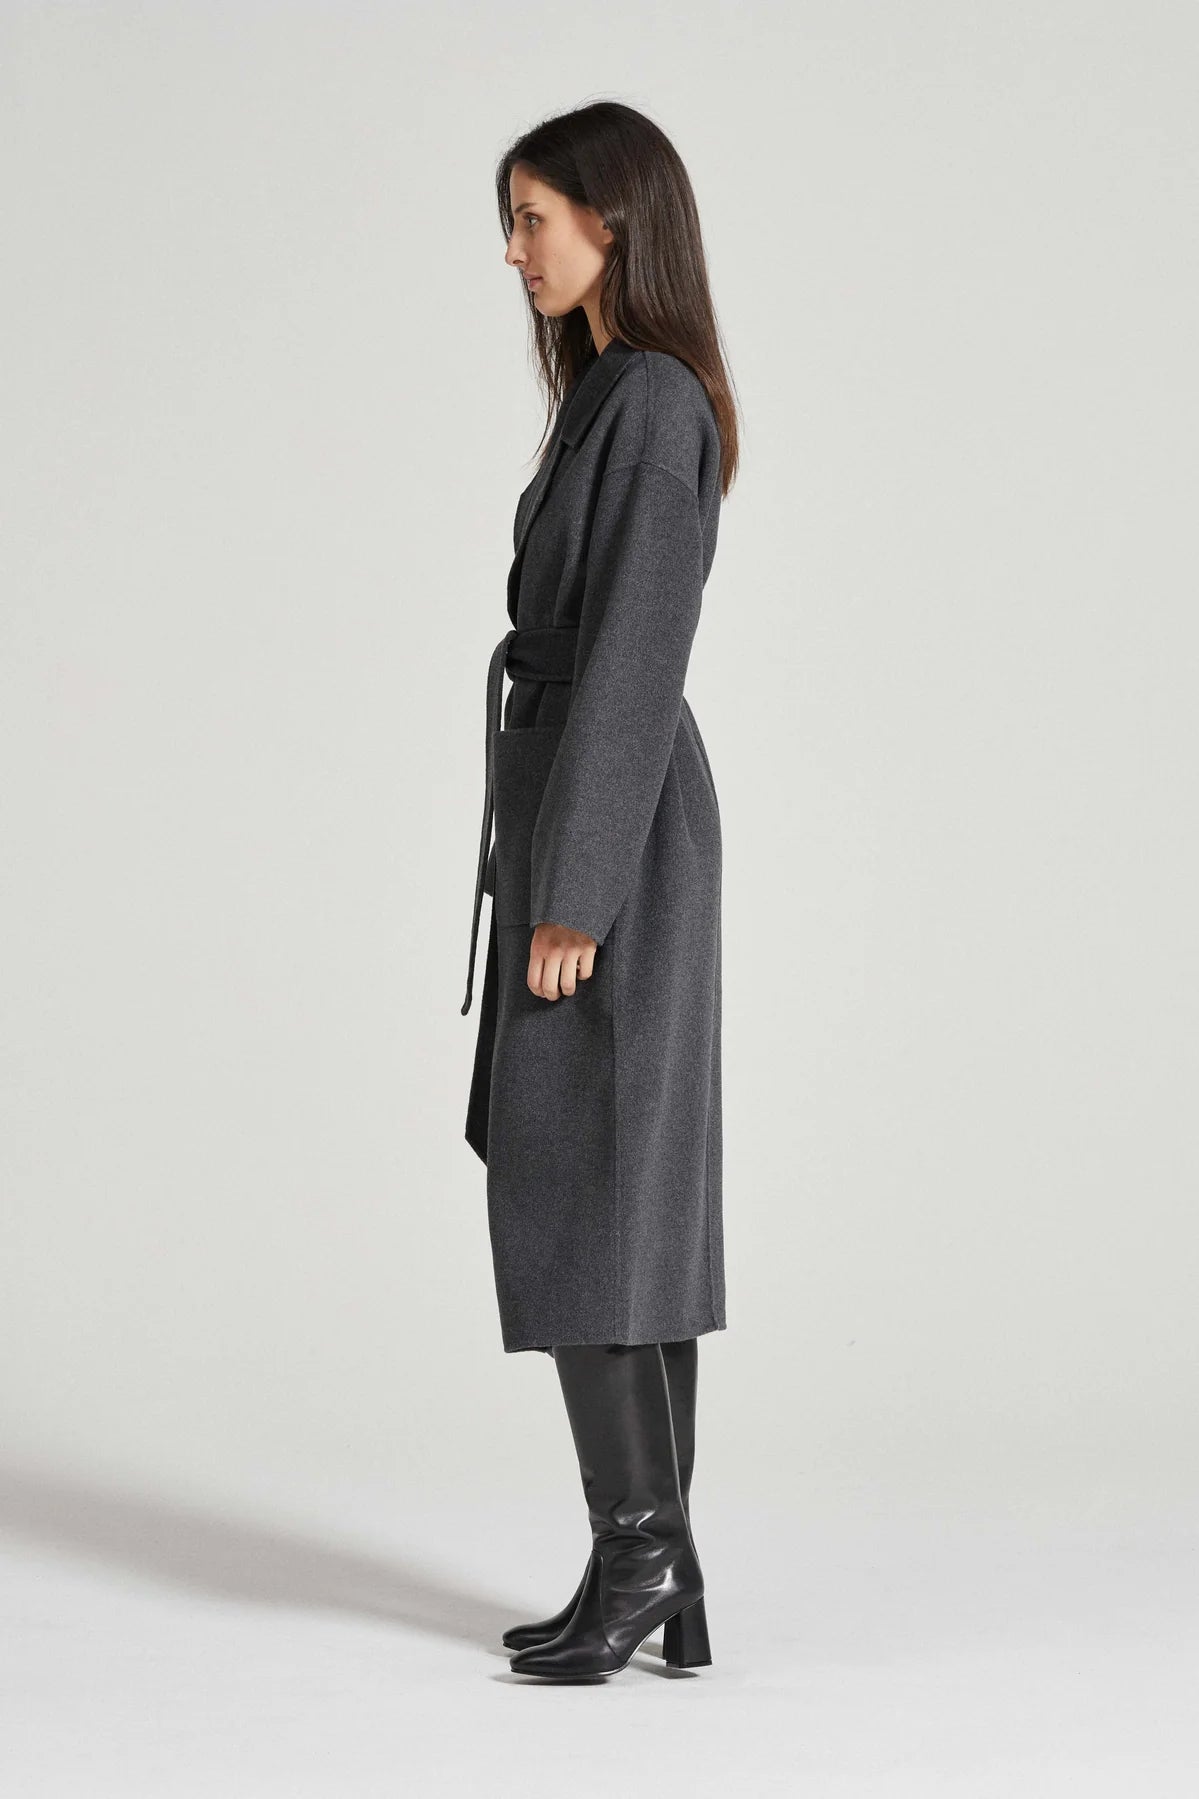 THE CAMILLA COAT - GREY MARLE - FRIENDS WITH FRANK